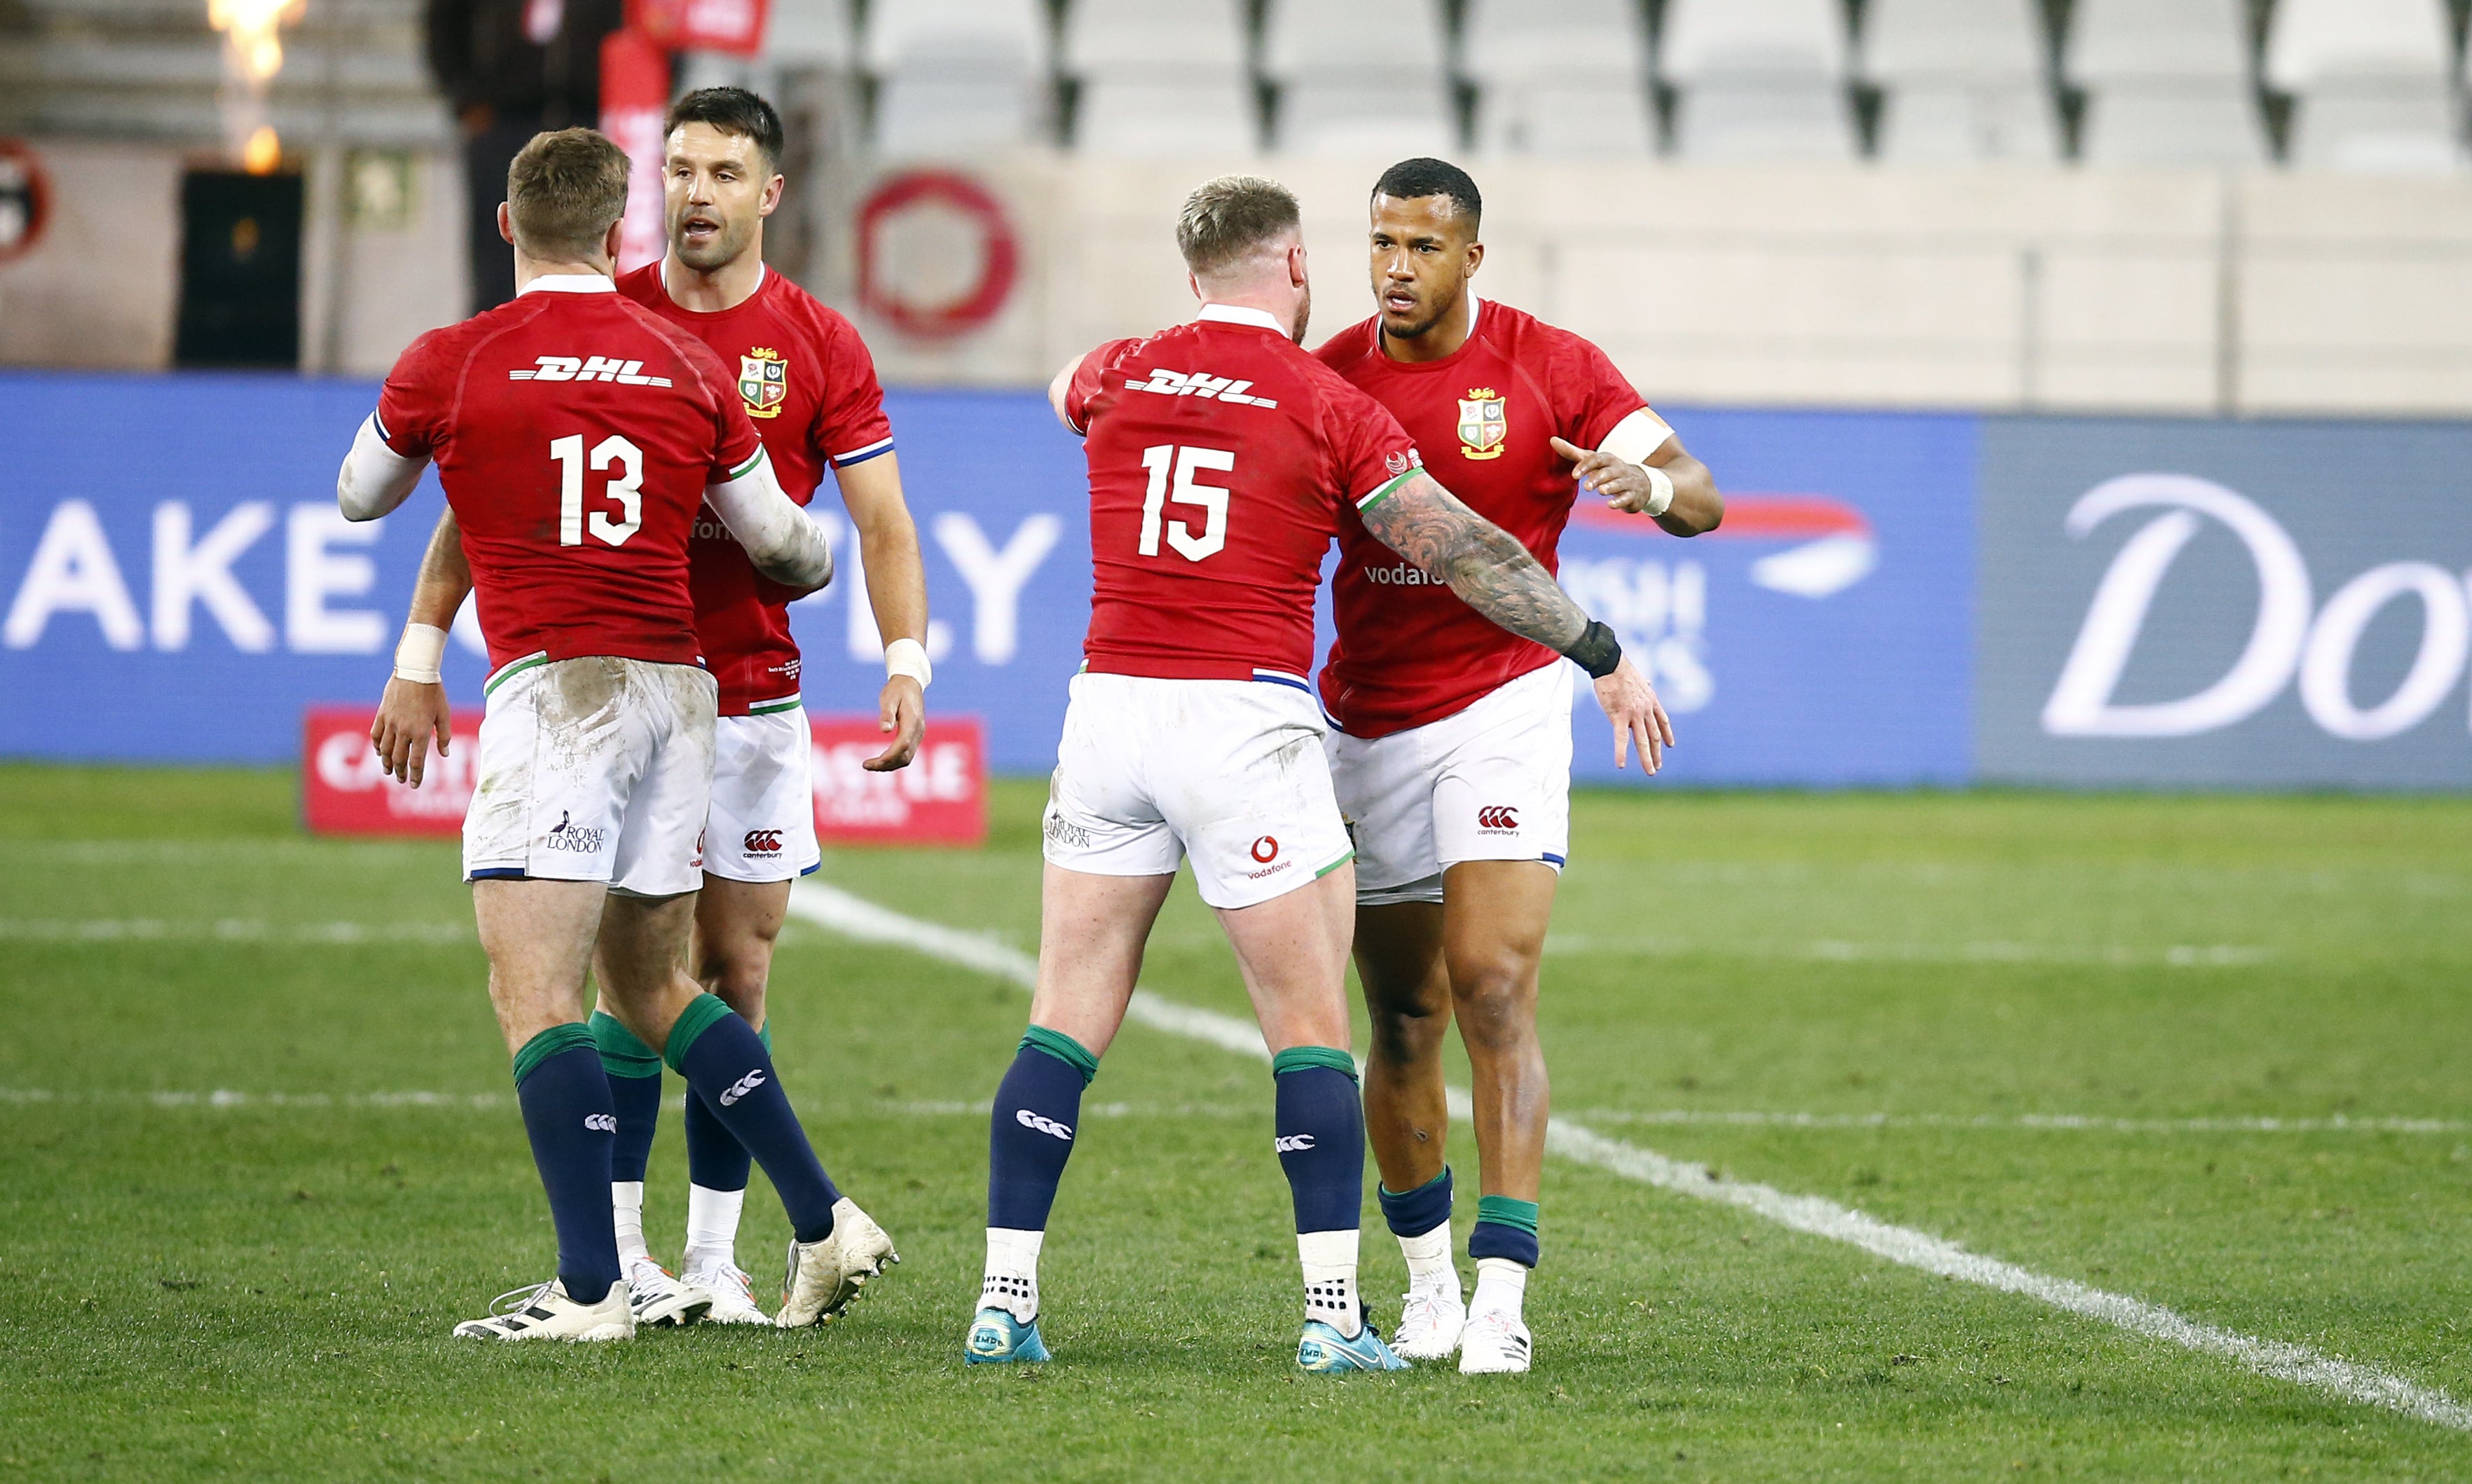 The British and Irish Lions celebrate winning the opening match of the series (Steve Haag/PA).